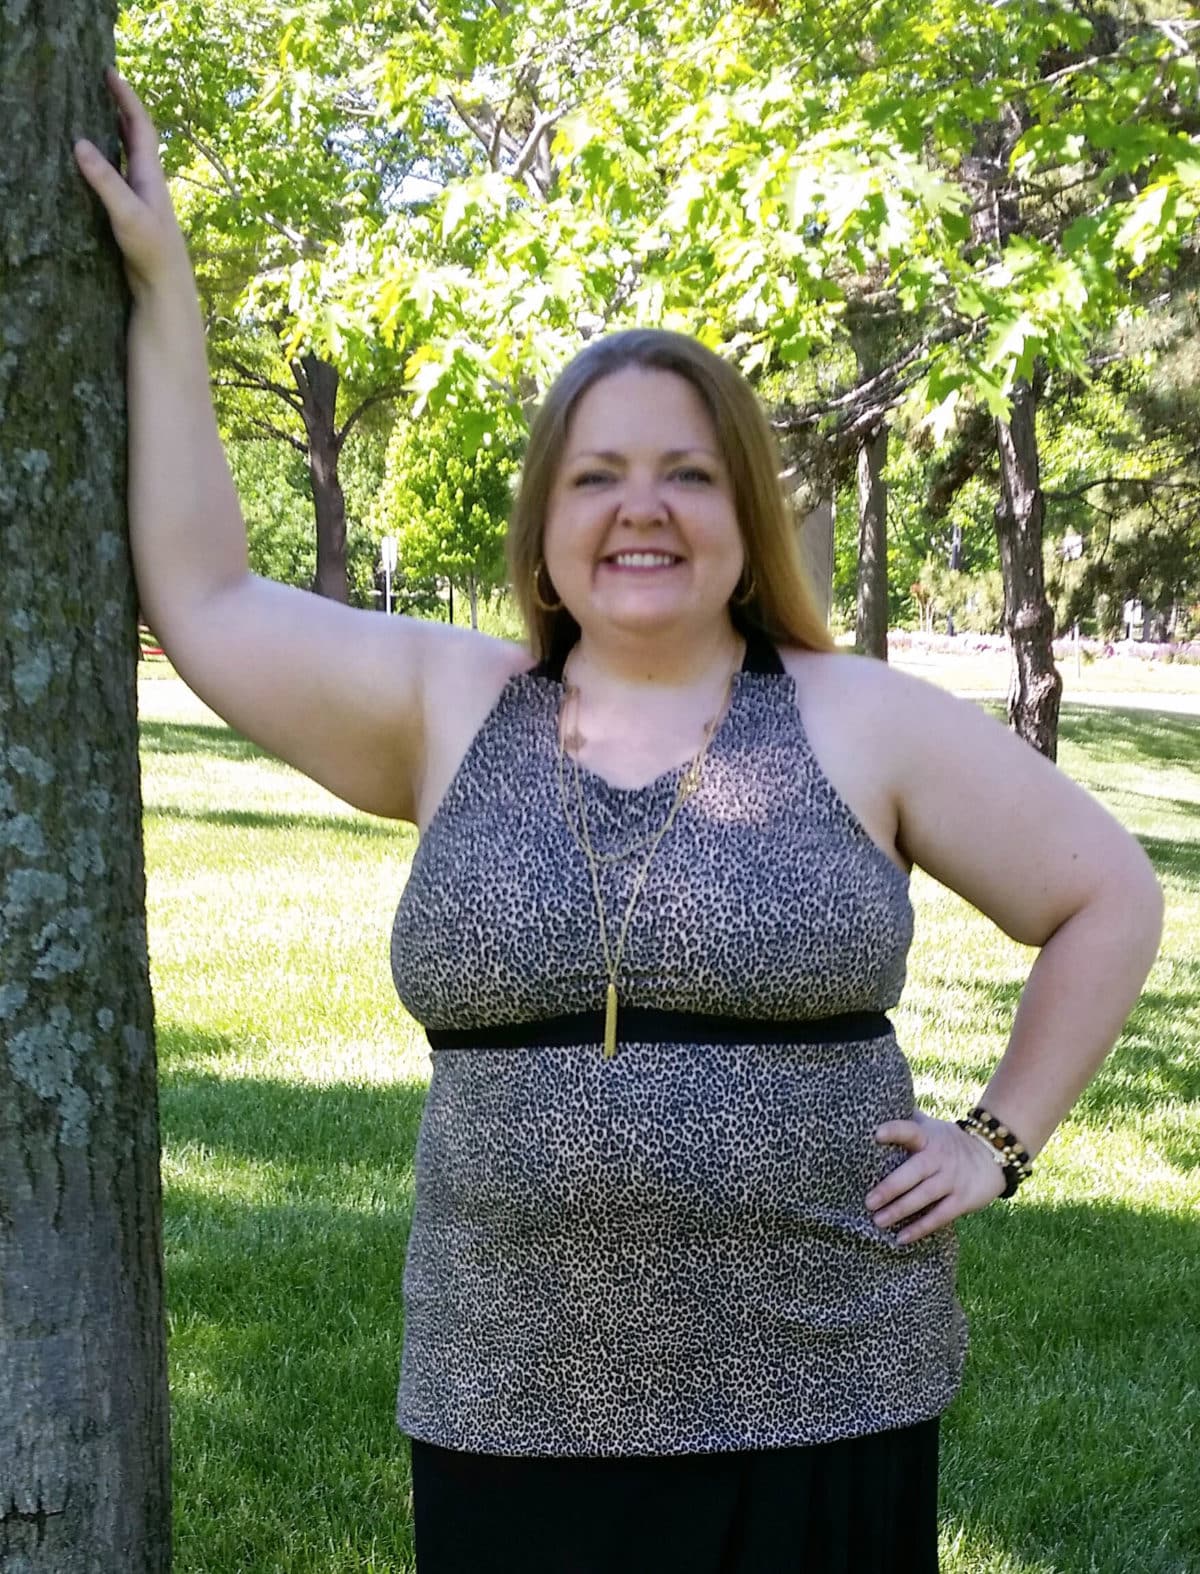 Journey Tank and Dress - 5 out of 4 Patterns